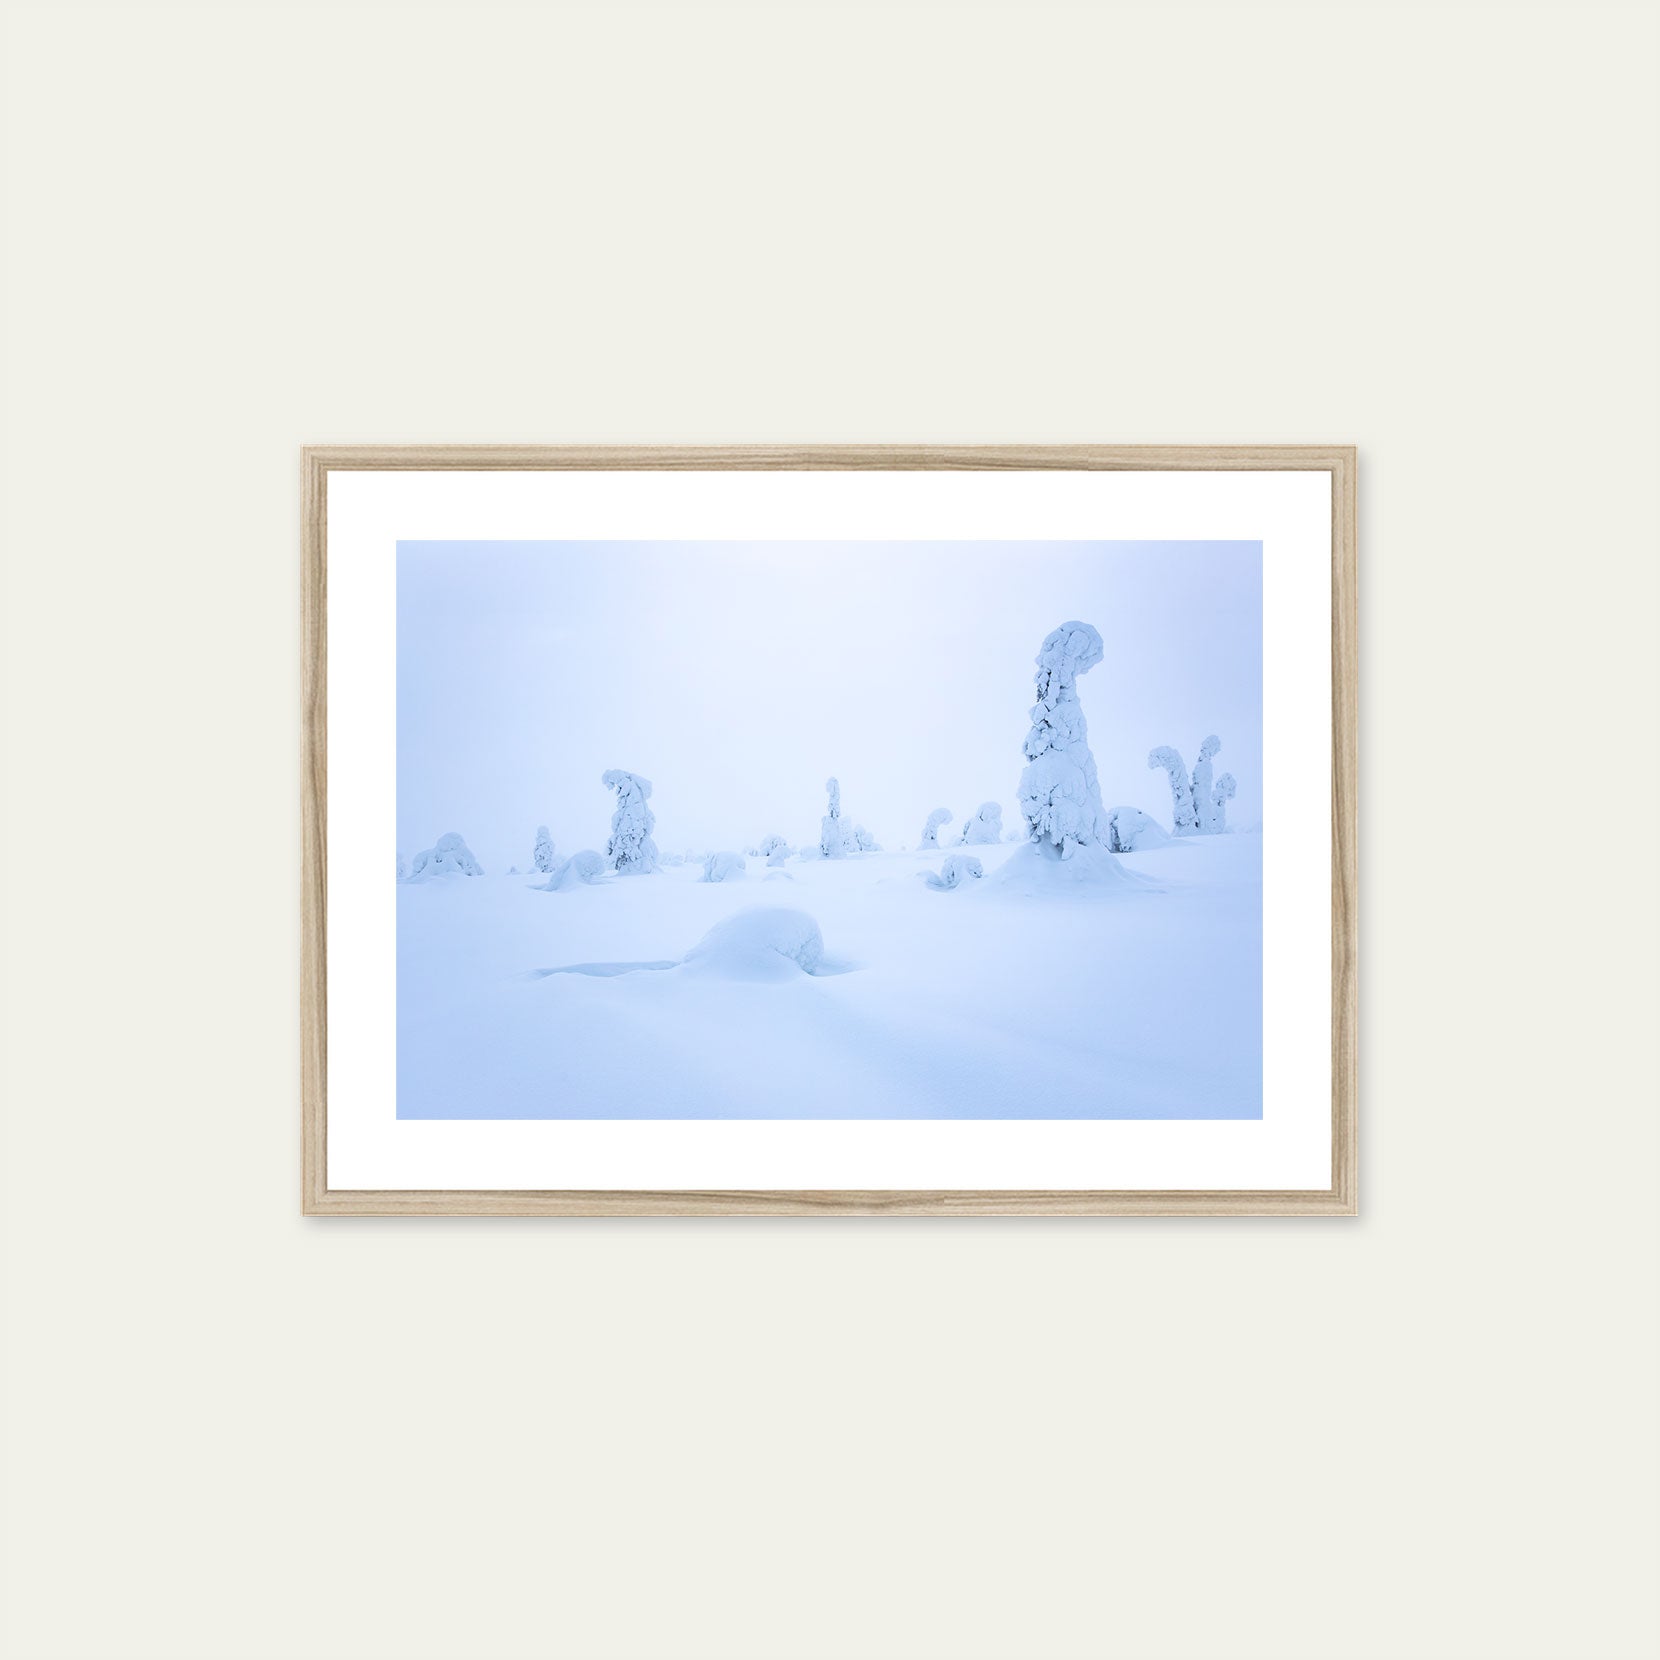 A wood framed print of snow covered trees